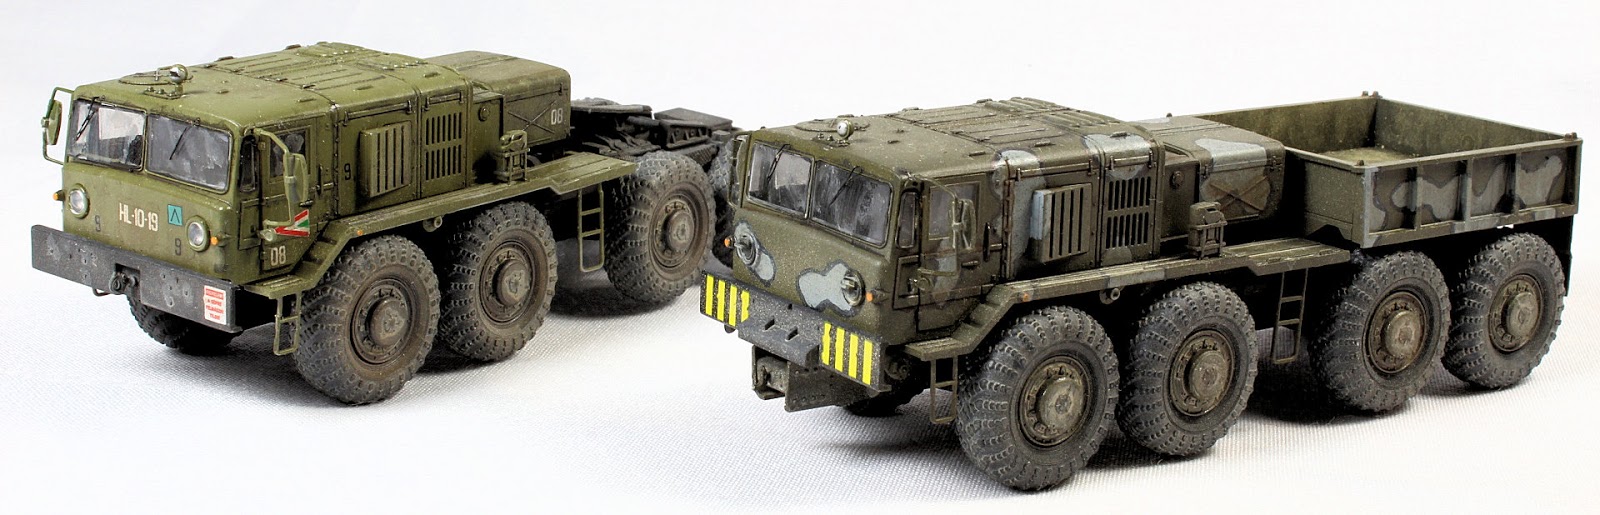 Details about   TAKOM 1/72 RUSSIAN ARMY TRACTORS SET KZKT-537L & MAZ-537 Kit EMS w/ Tracking NEW 